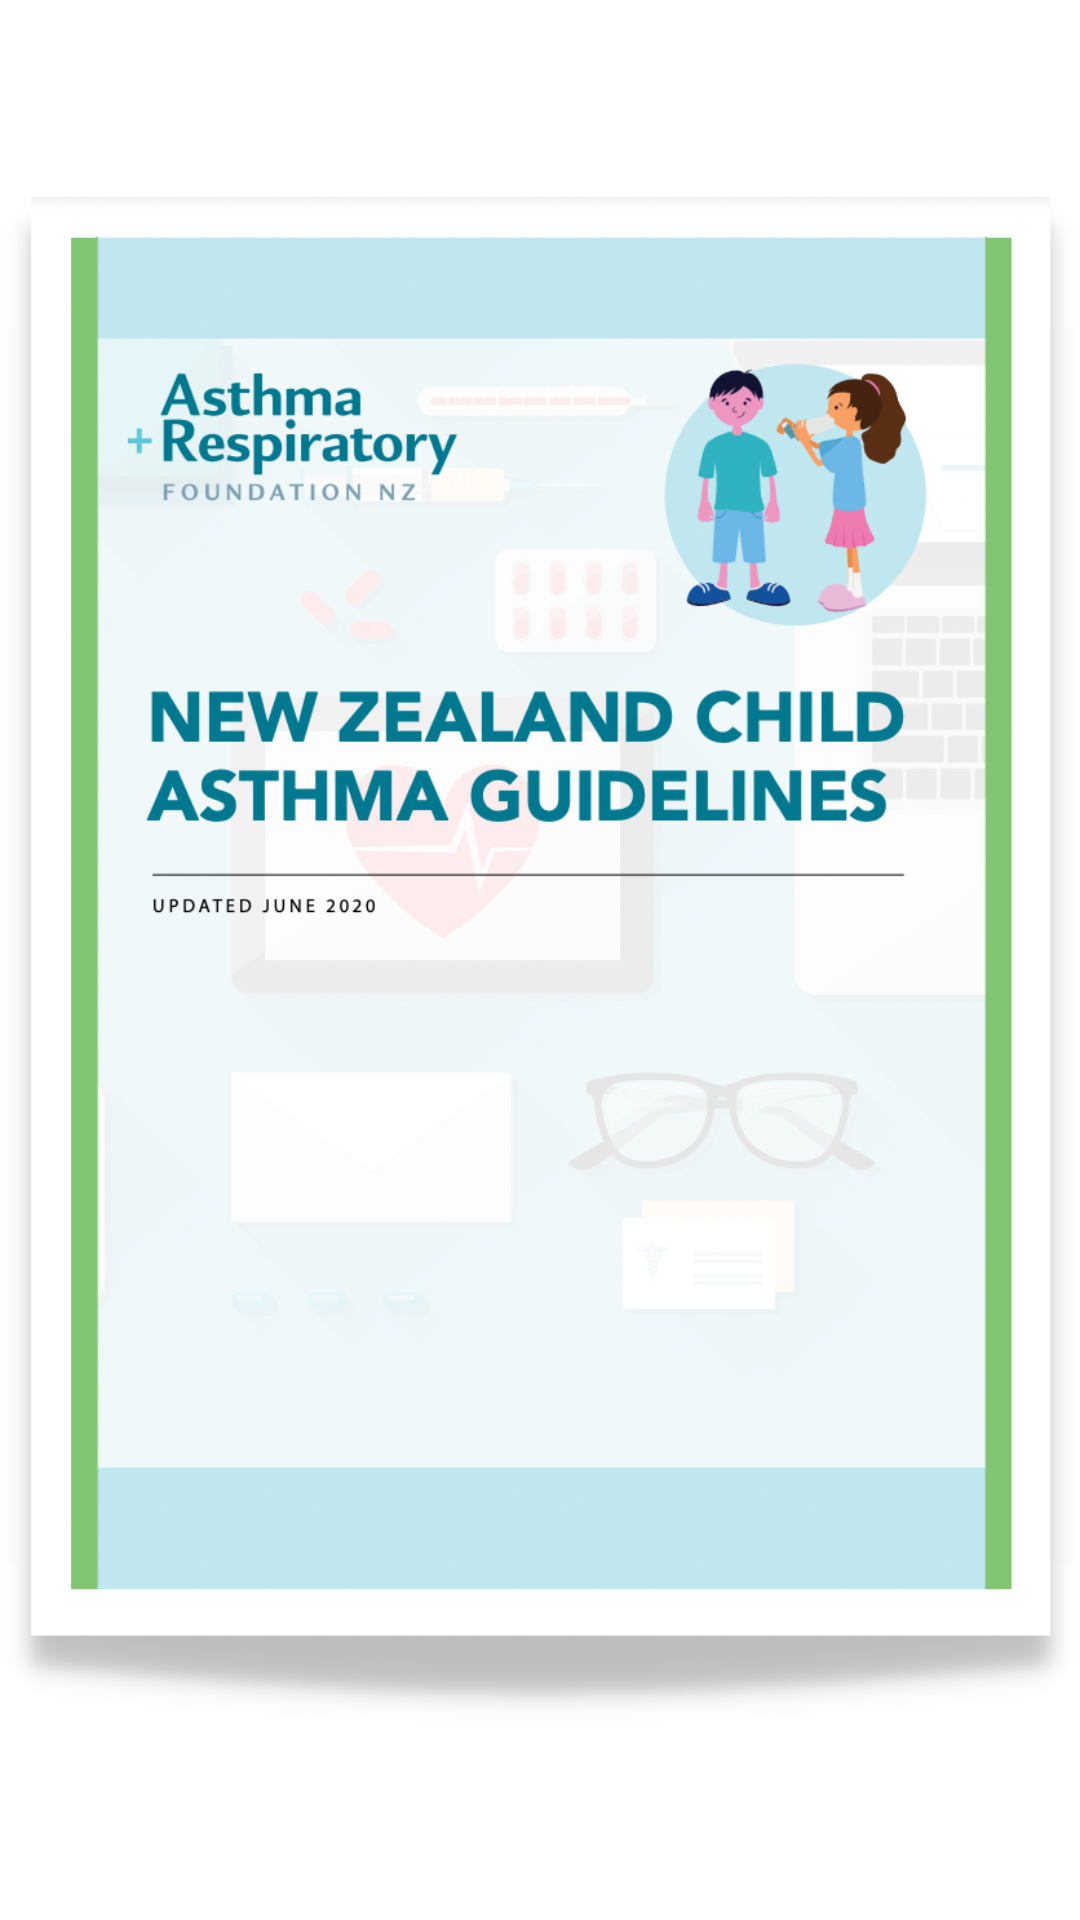 NZ Child Asthma Guidelines